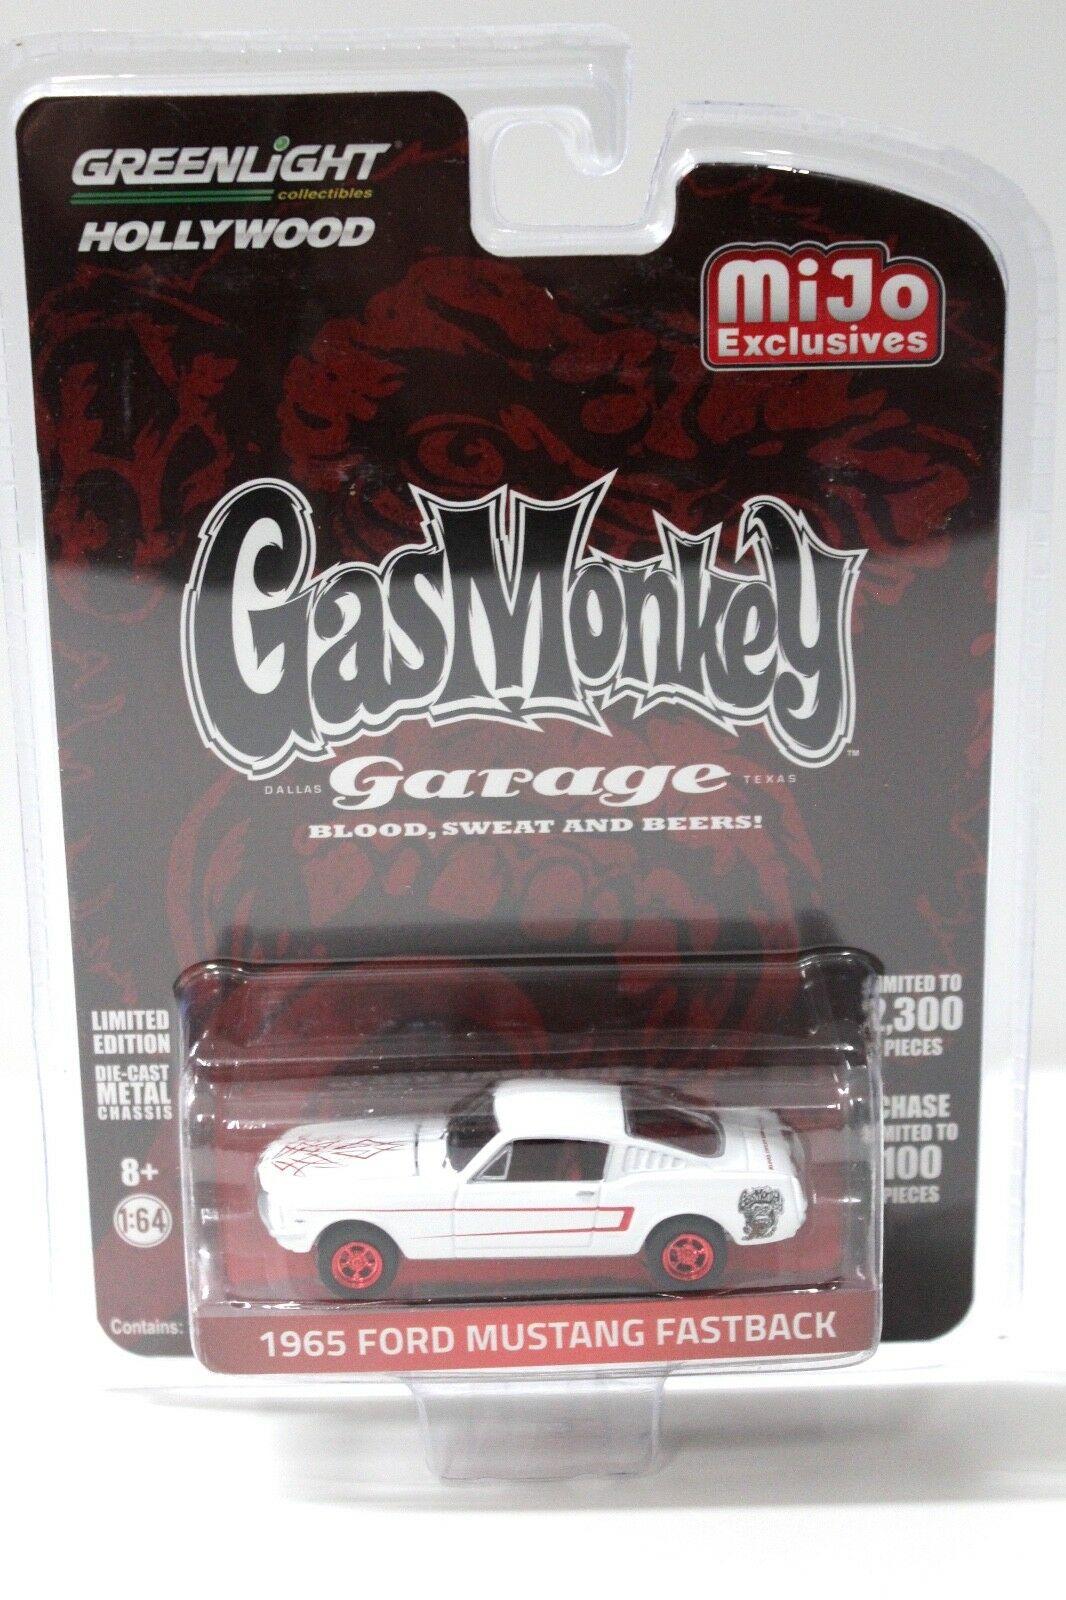 1:64 Greenlight Ford Mustang Fastback white GAS MONKEY 